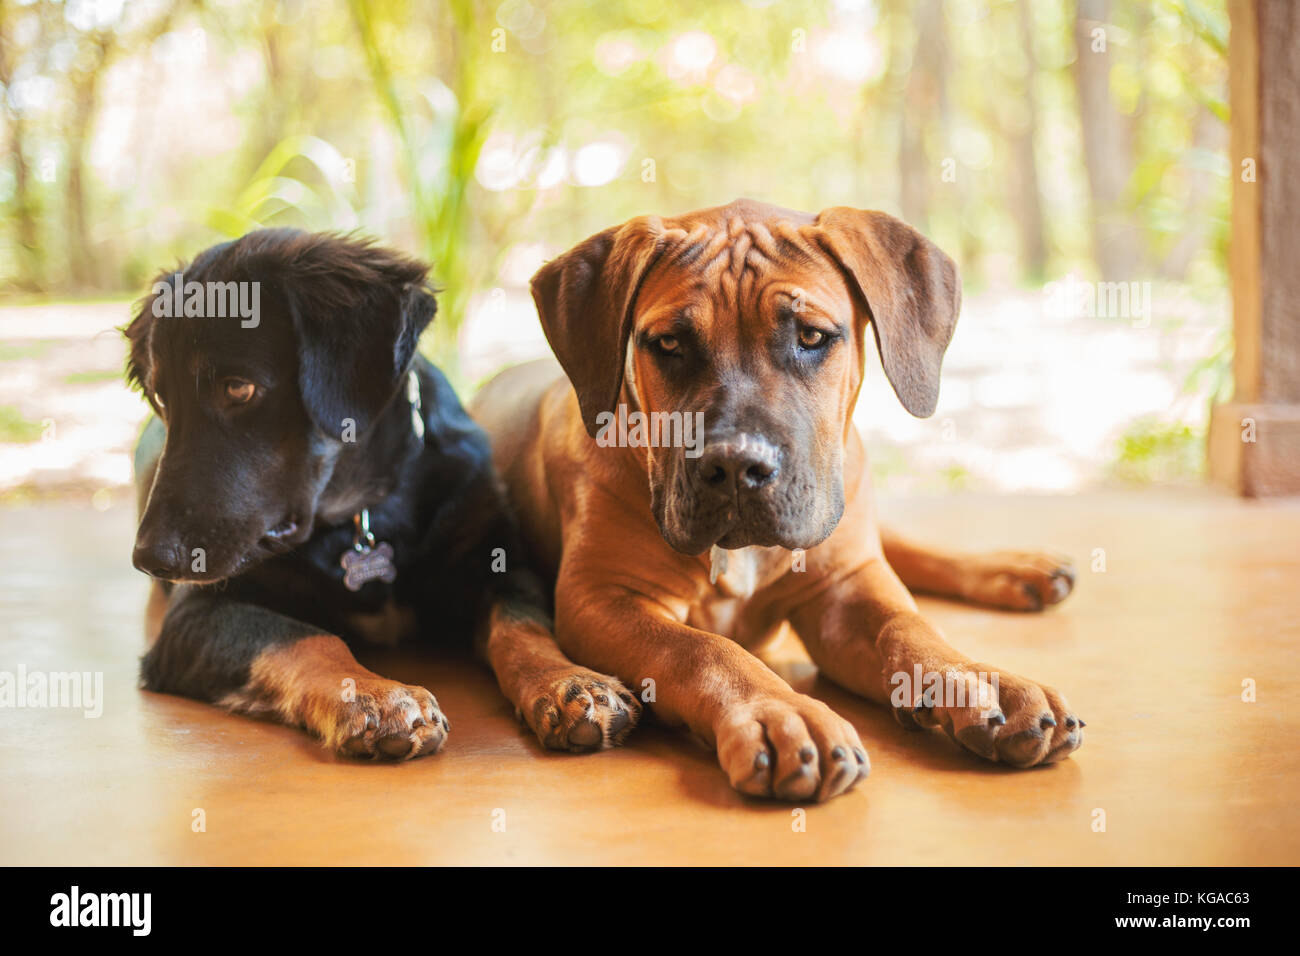 Two puppies (A german shepherd x Labrador and a Boerboel) laying next to each other. Stock Photo